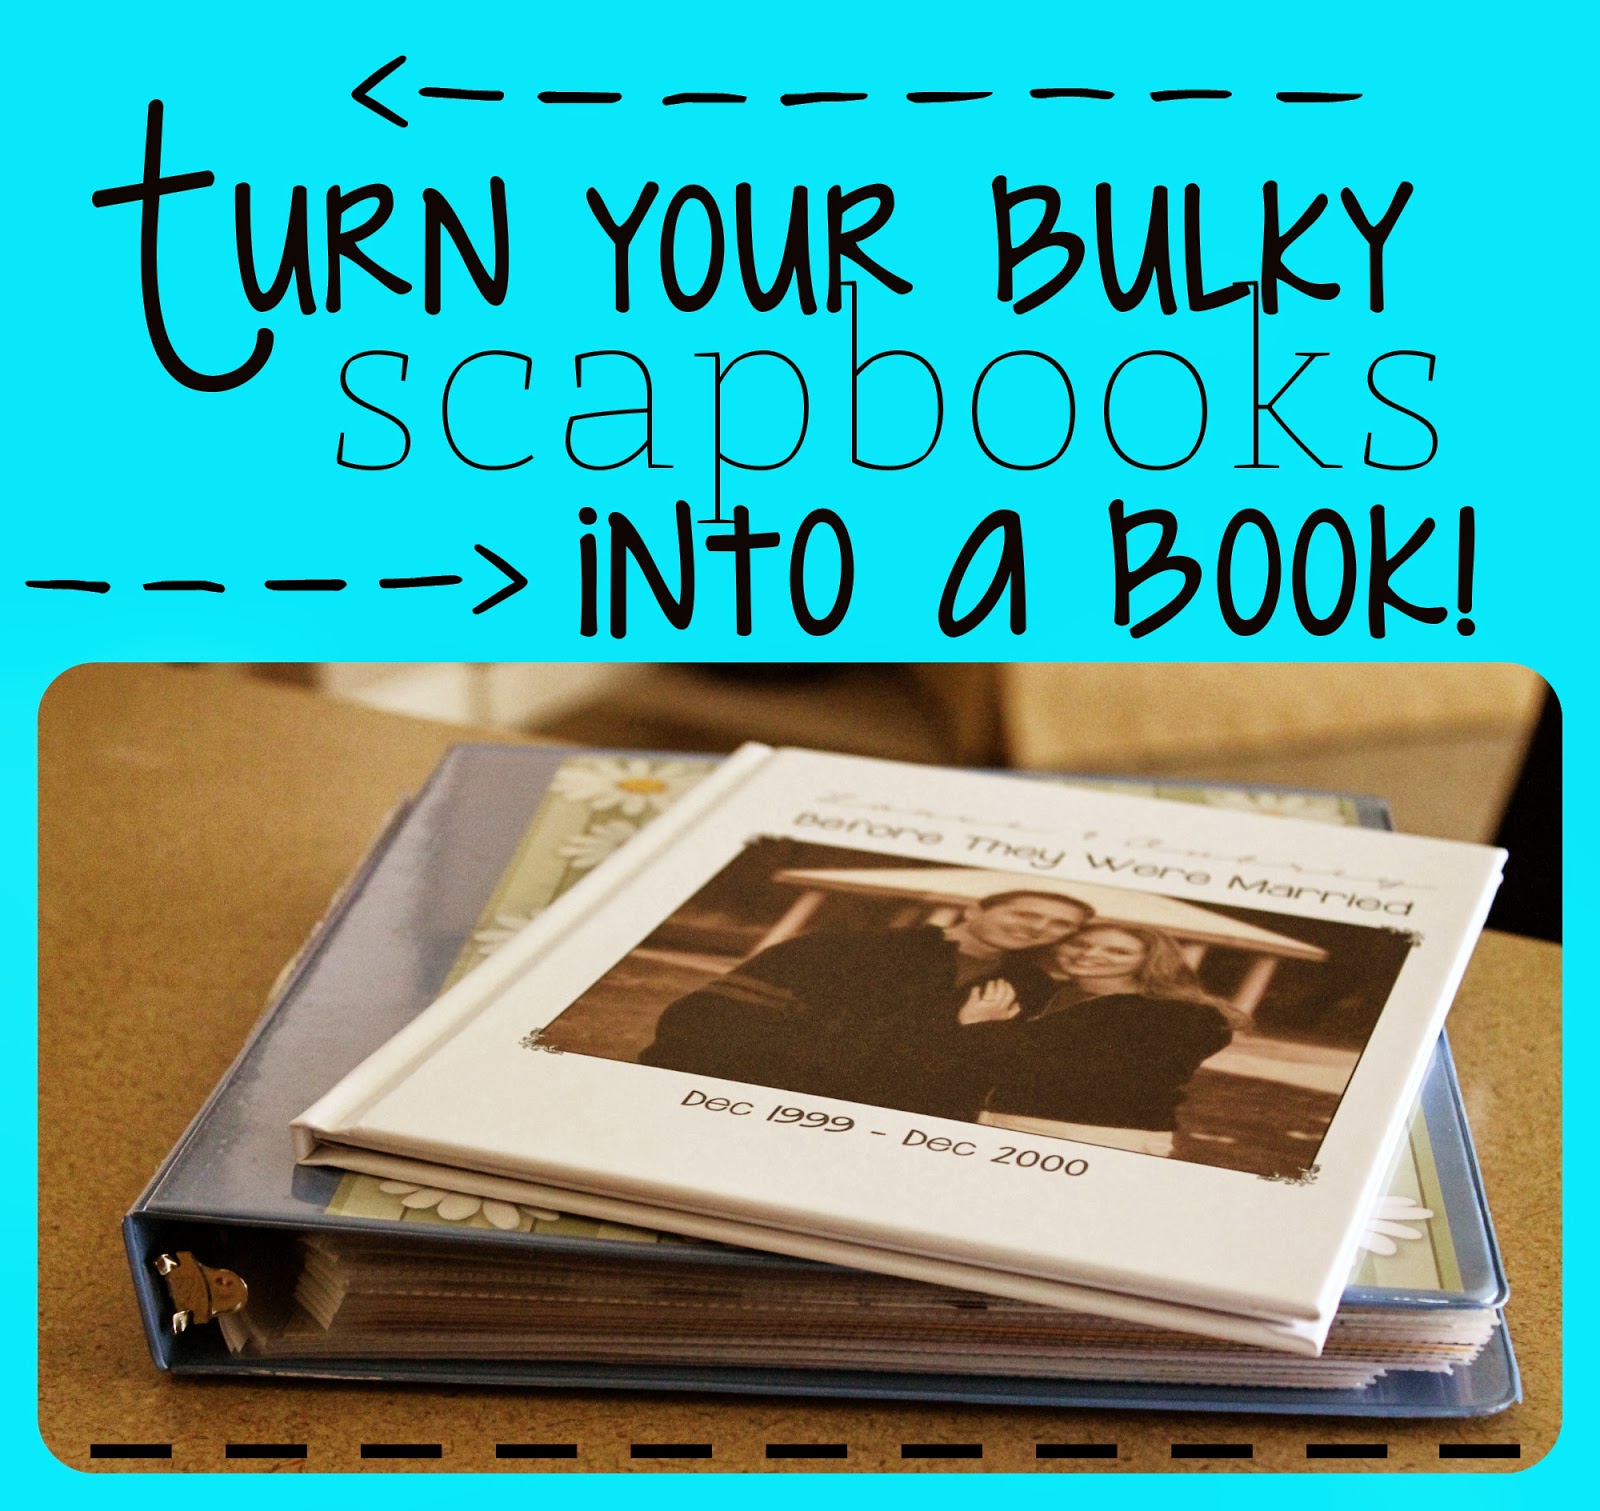 Scrapbooking vs. Photo Books: Which Is Best To Preserve Your